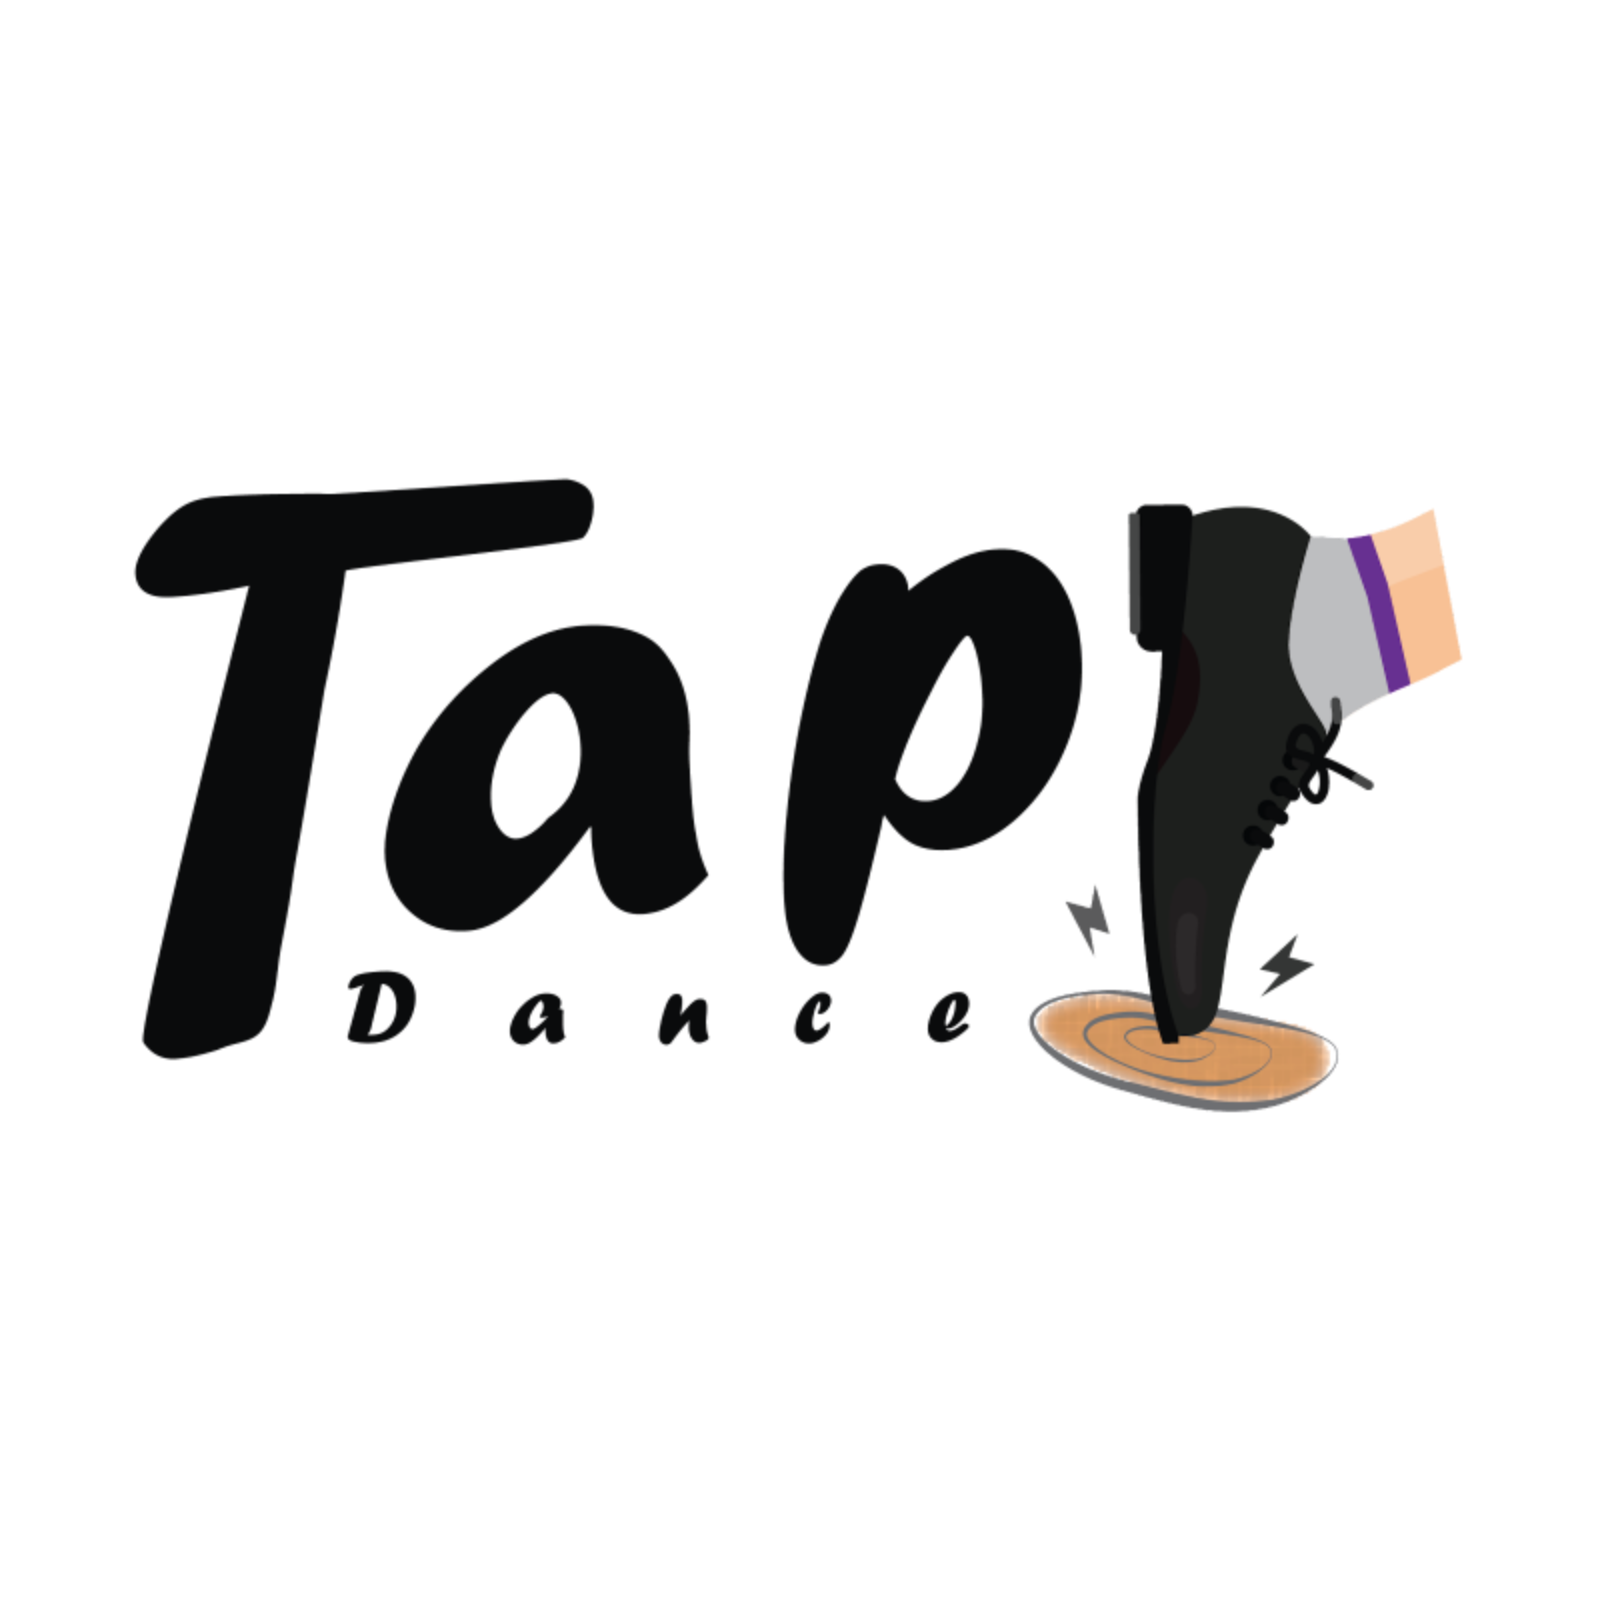 Text reads"Tap Dance" and one foot wearing shoes